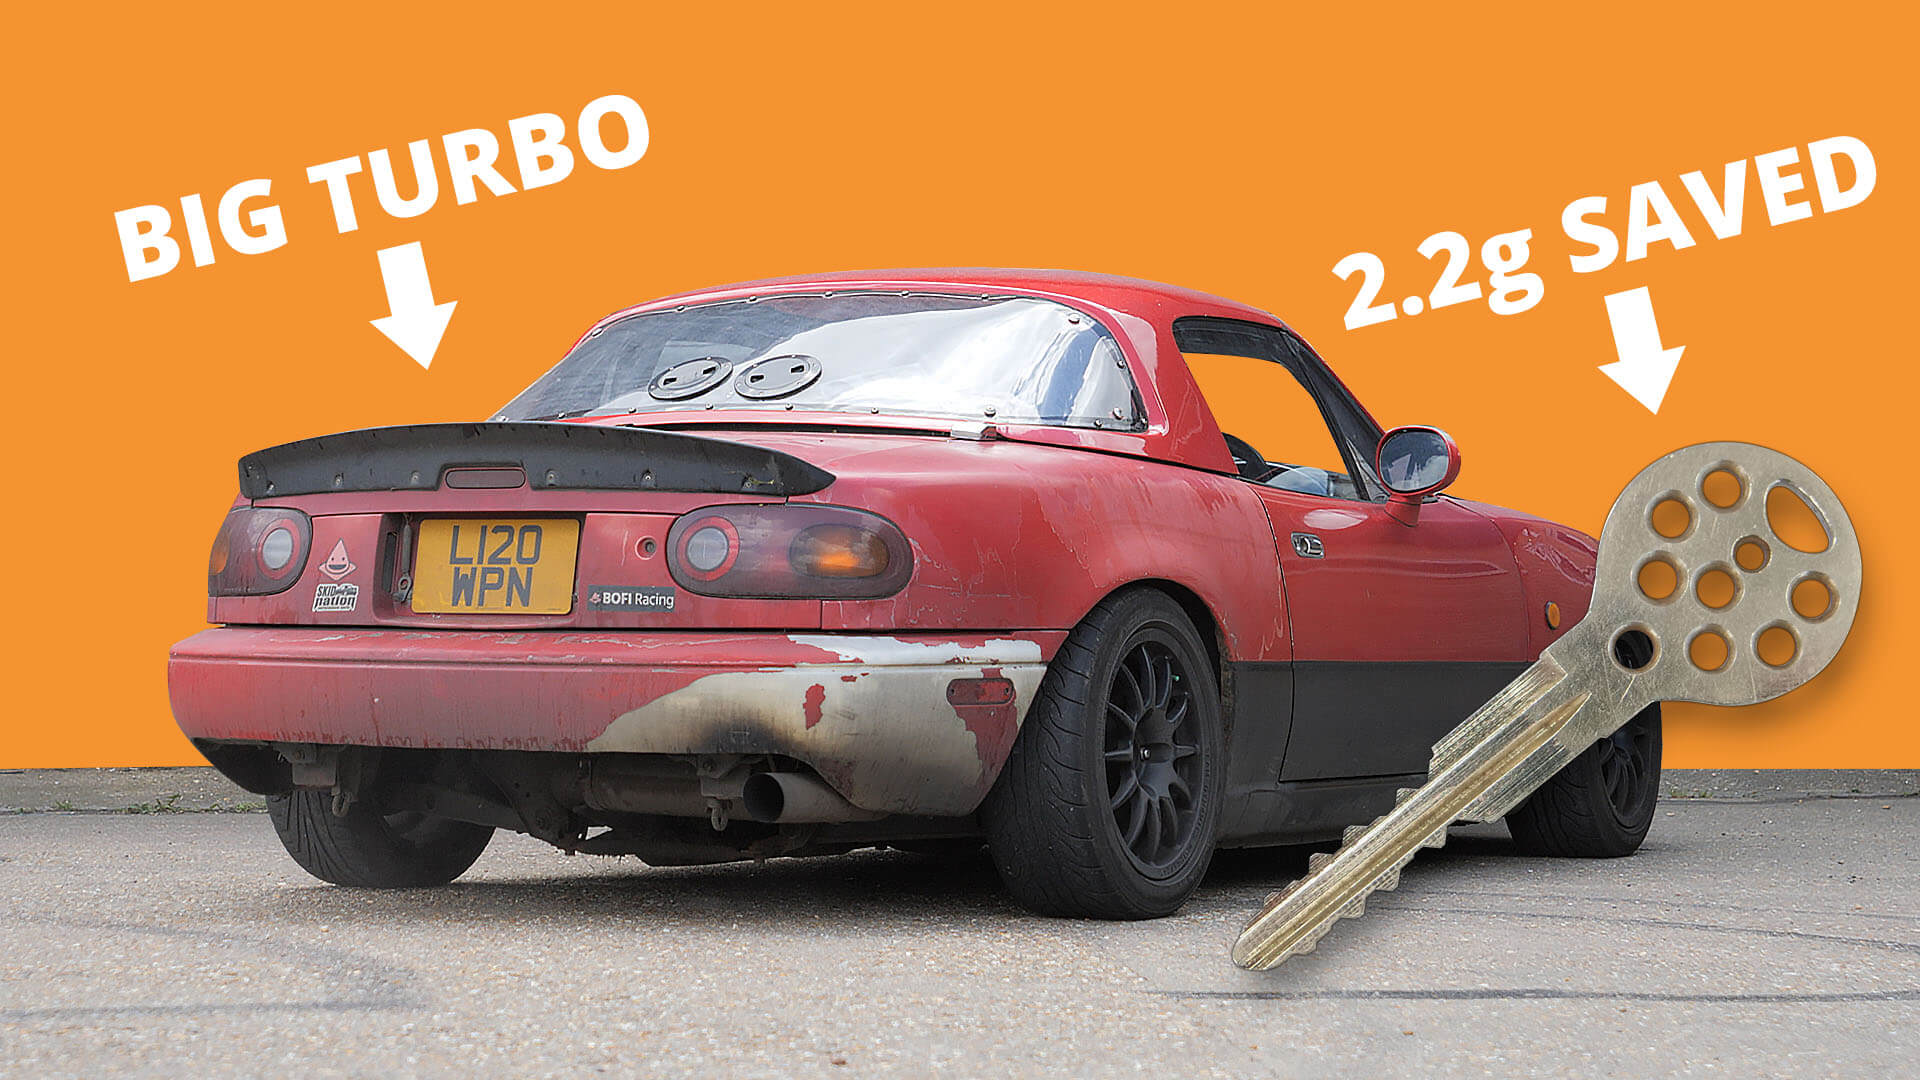 This Is Every Modification On Our DISGUSTING Big Turbo Mazda MX-5 Miata